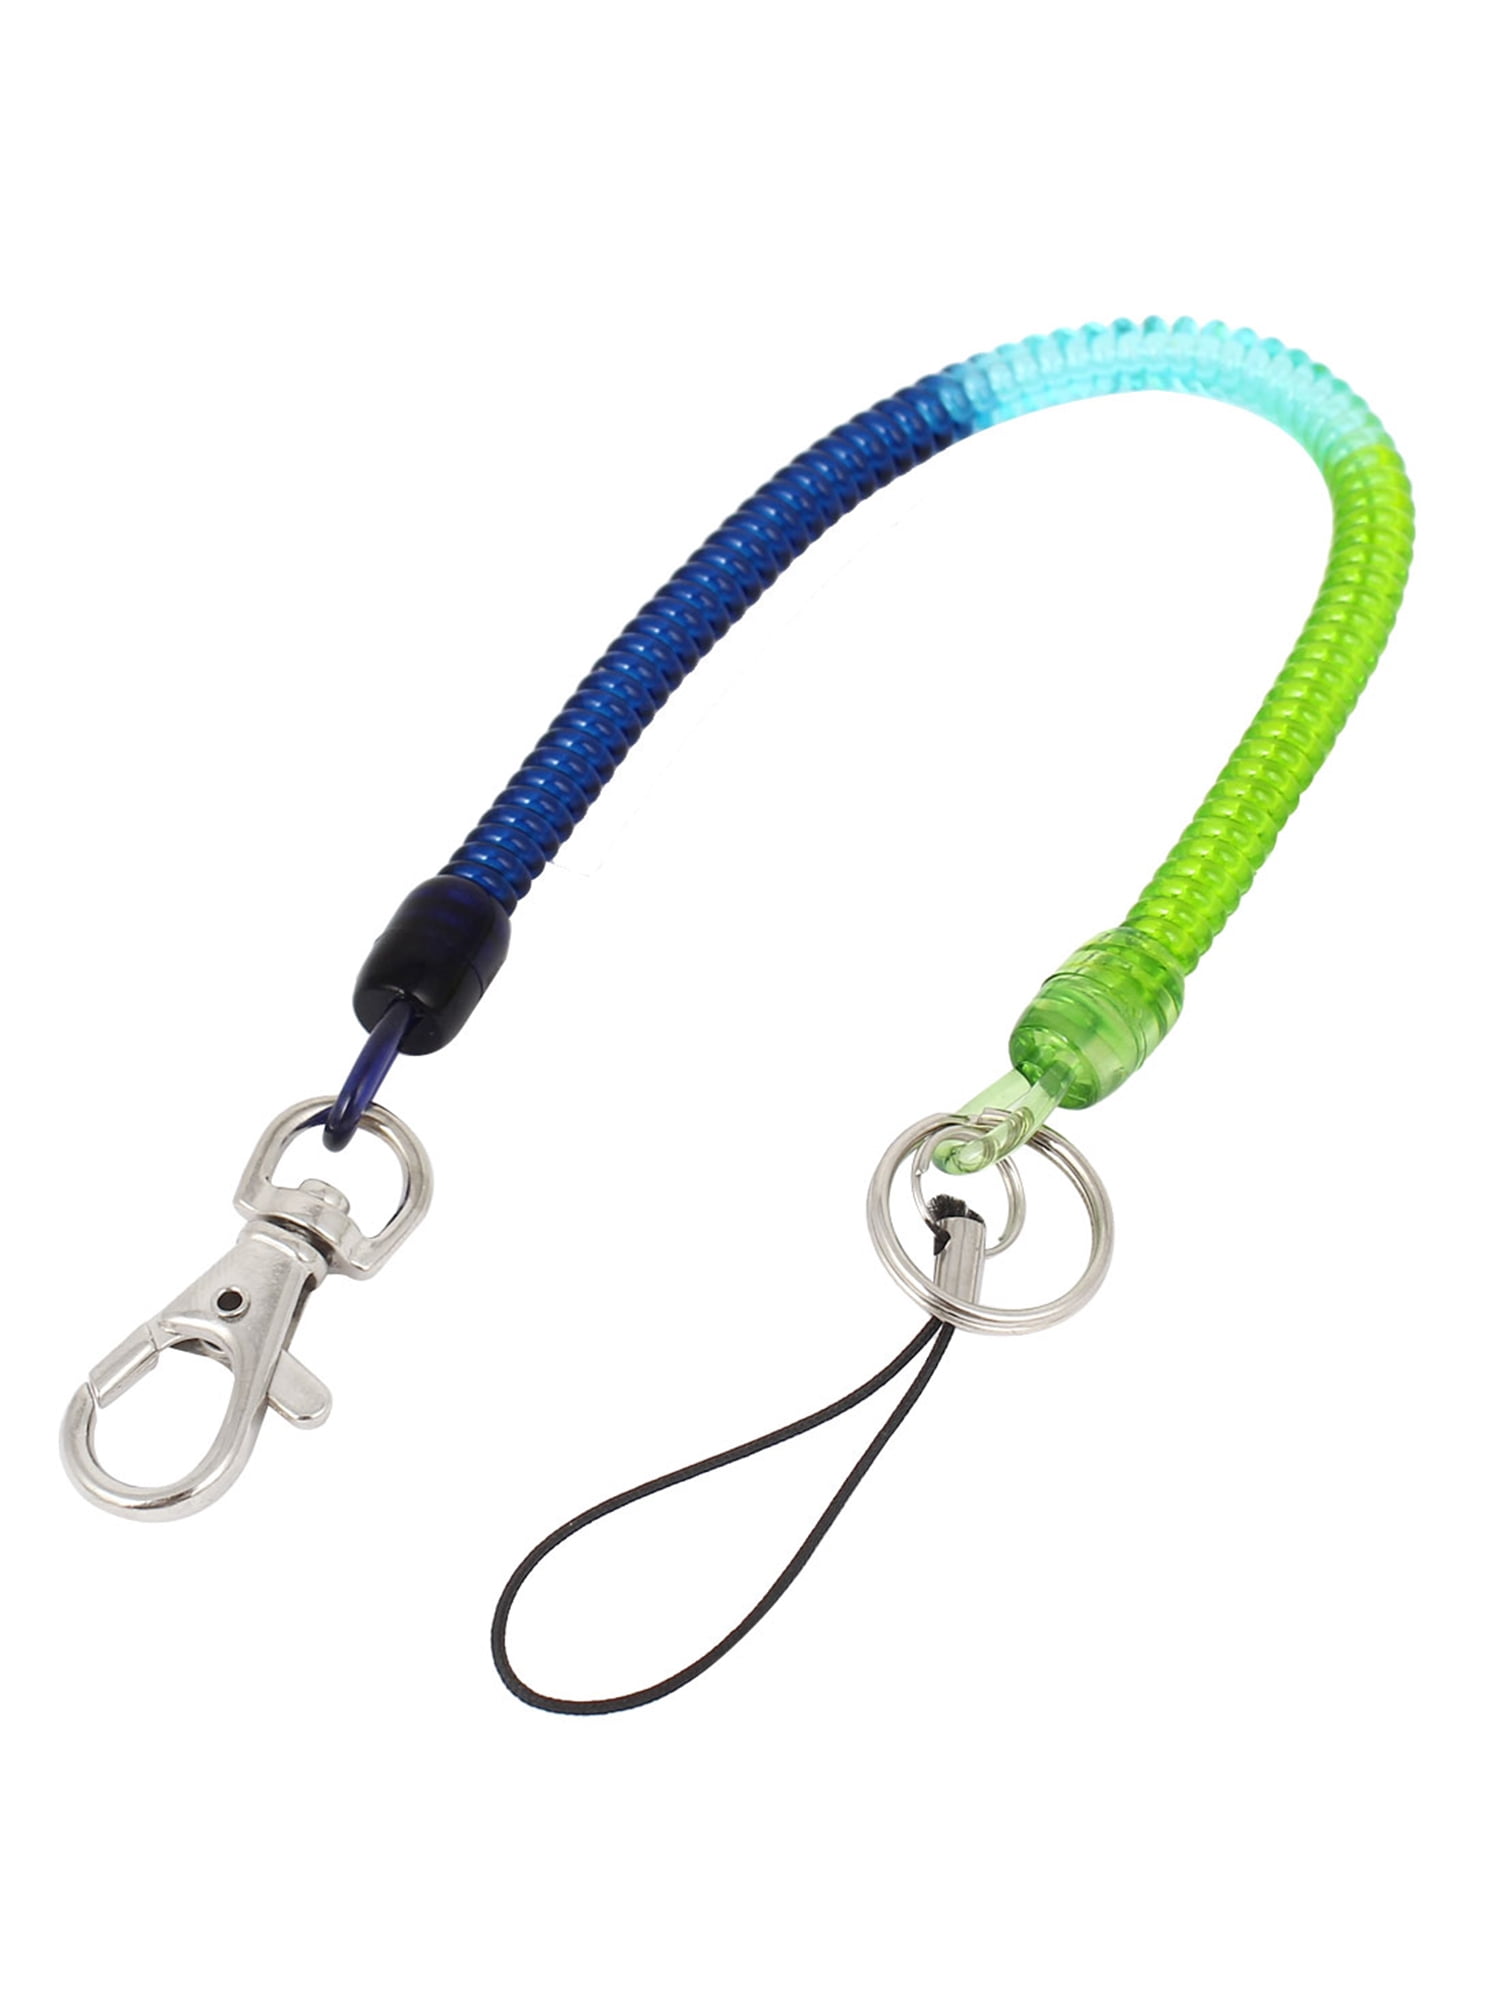 2xStretchy Elastic Spiral Spring Coil Strap Rope Lanyard Key Chain Key-ring SAAN 